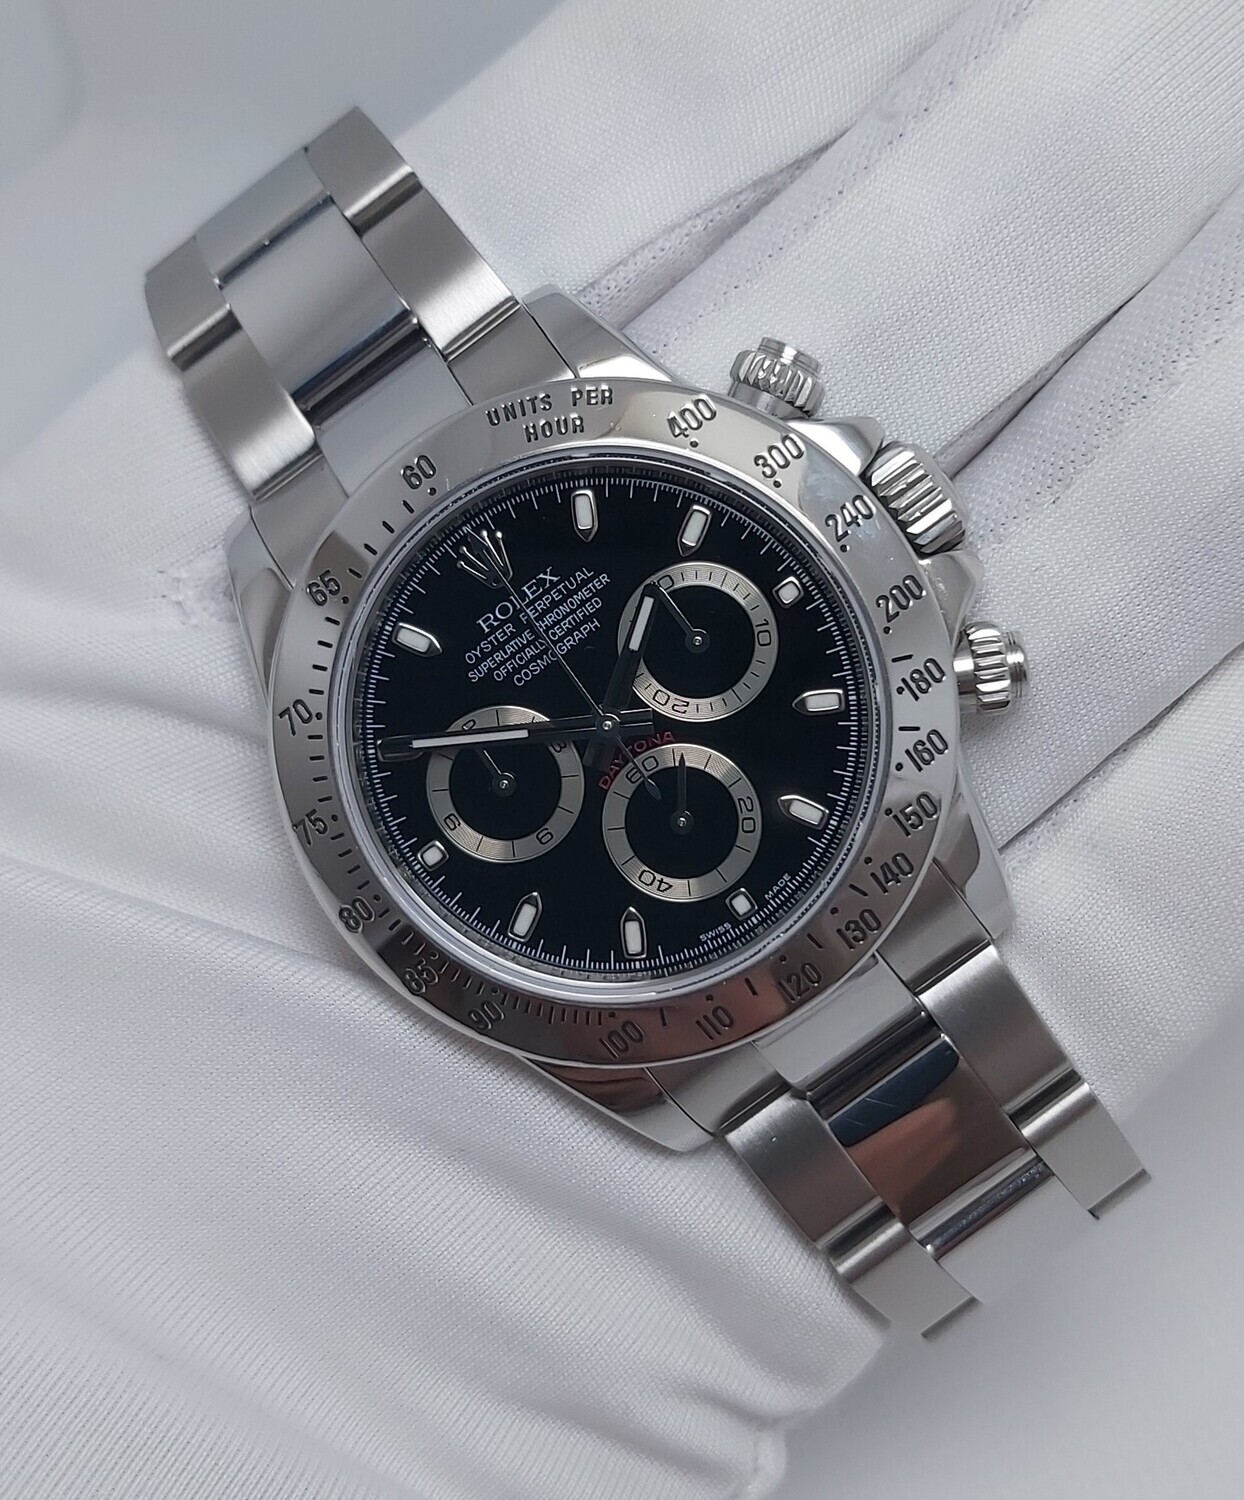 Rolex Daytona 116520 Black Dial - Stainless Steel - 2009 Box & Papers